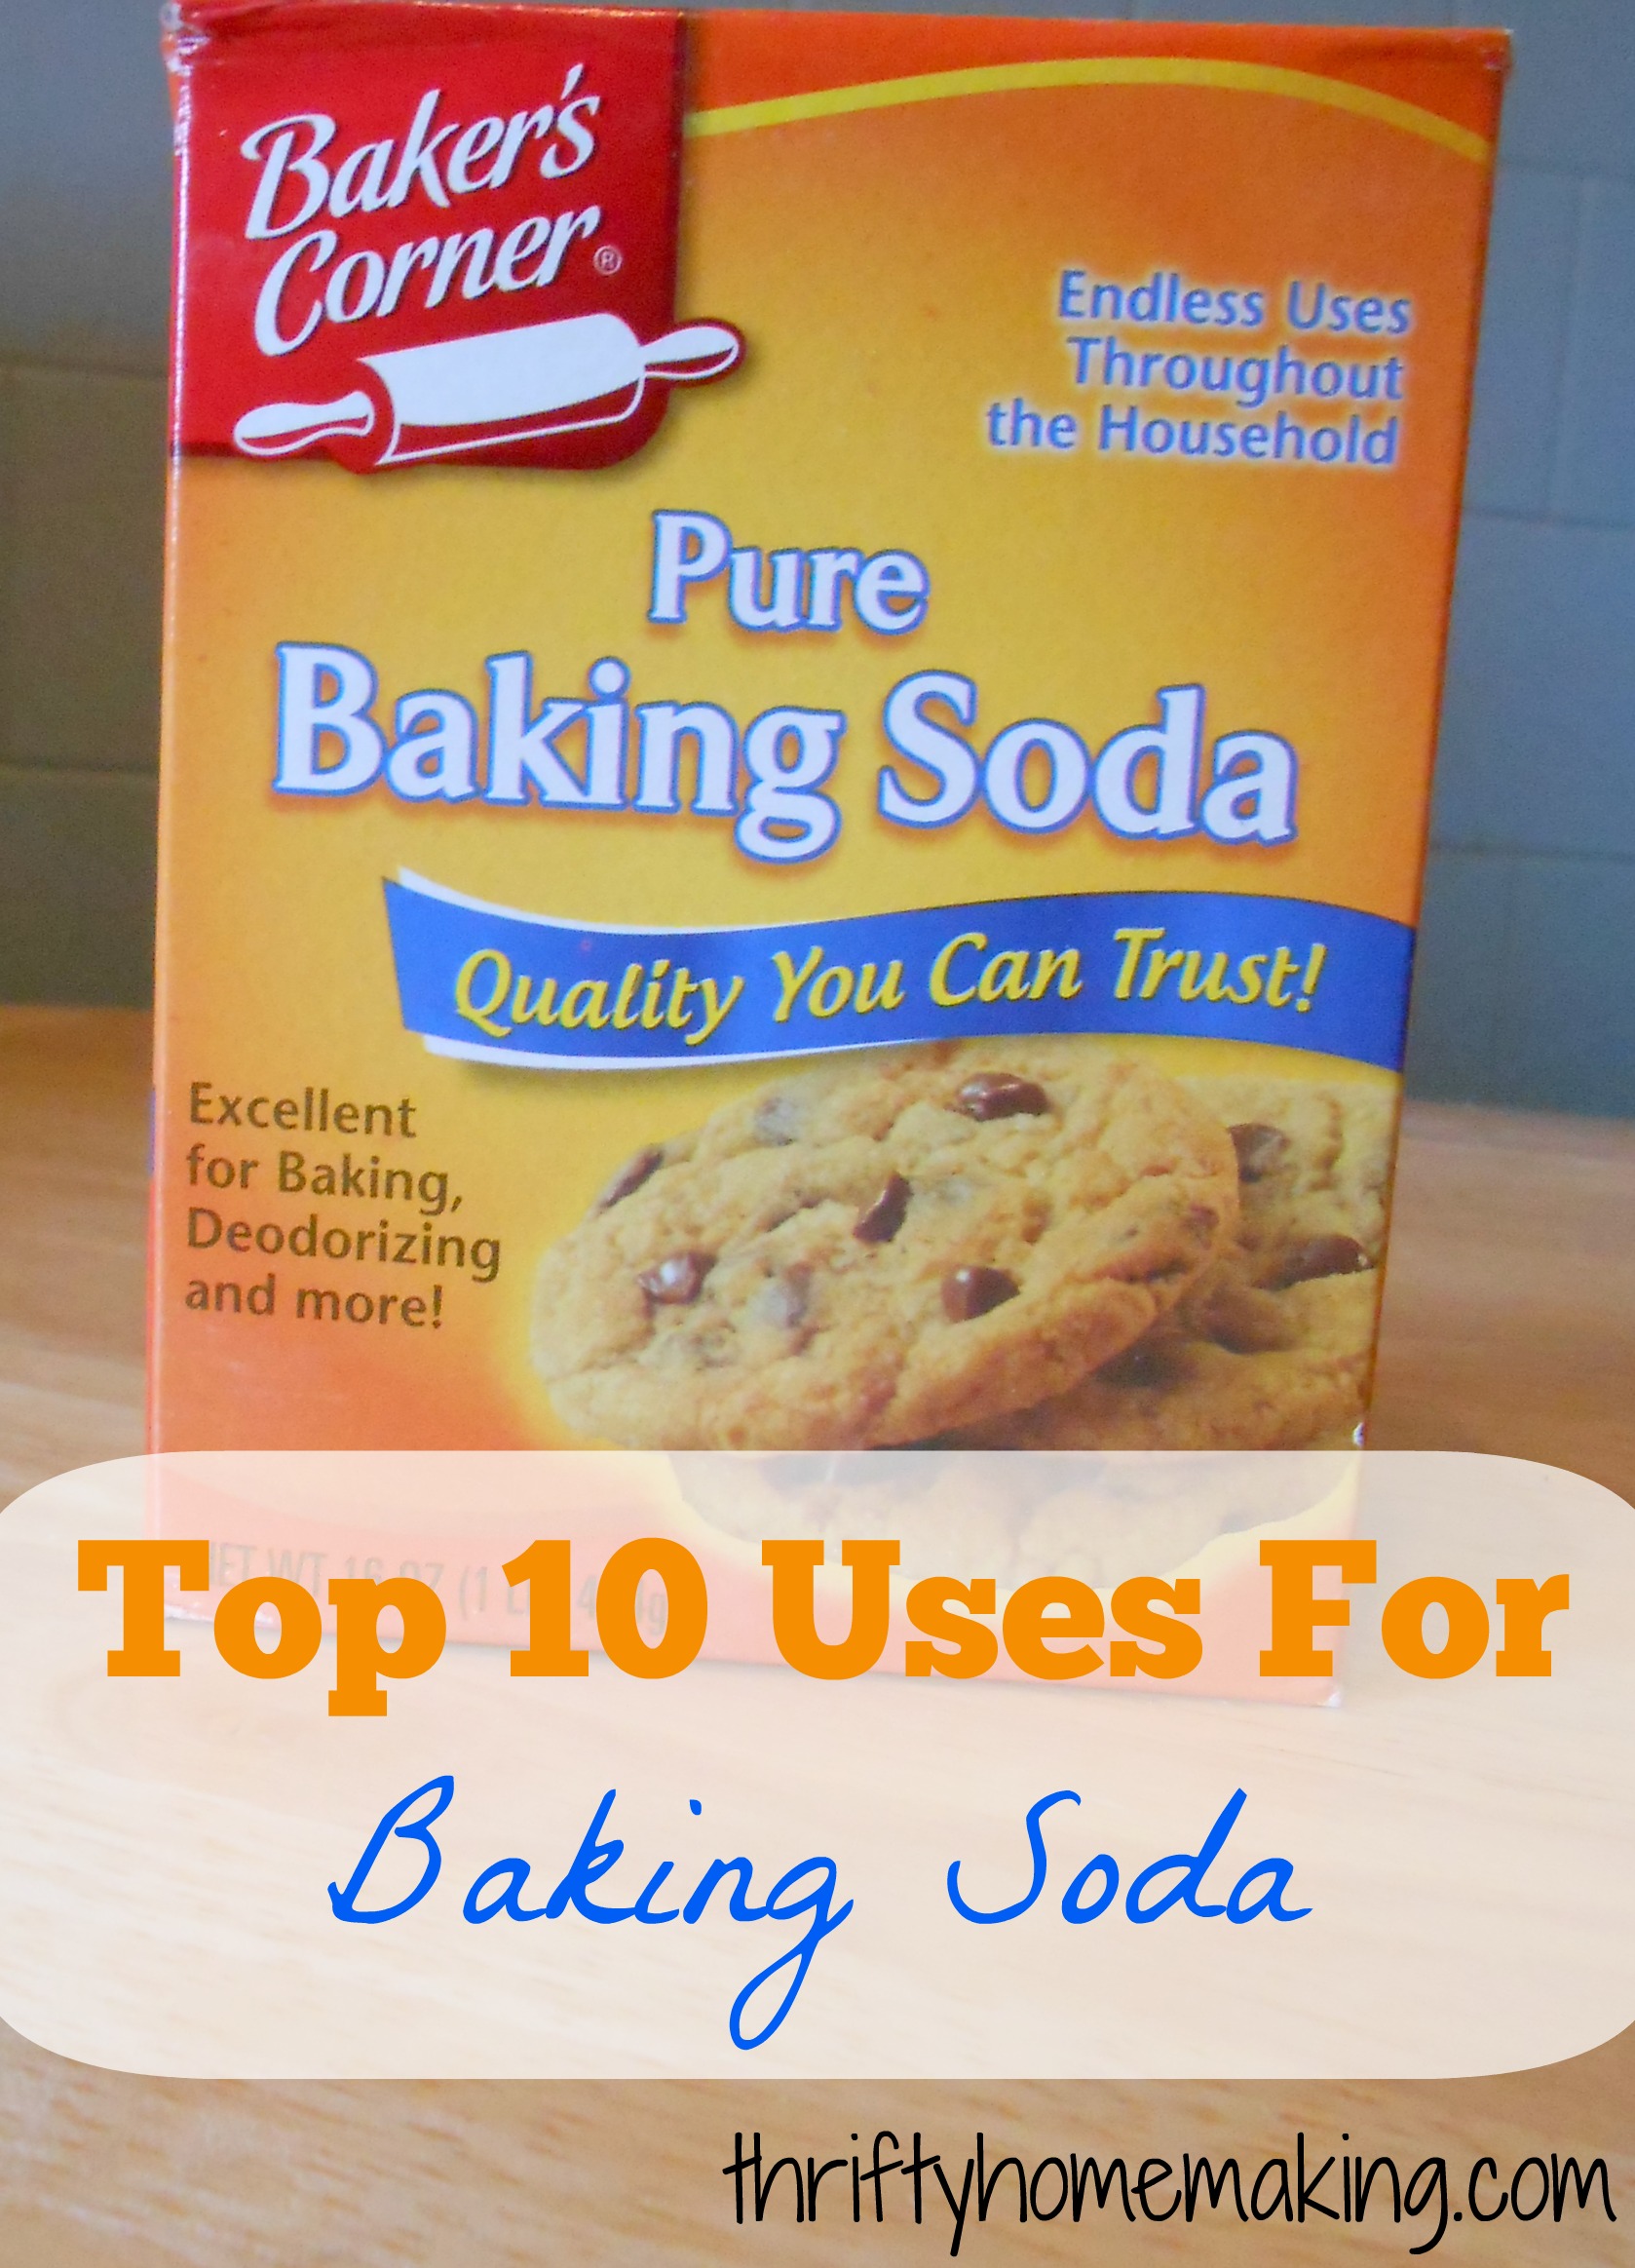 Top 10 Uses for Baking Soda